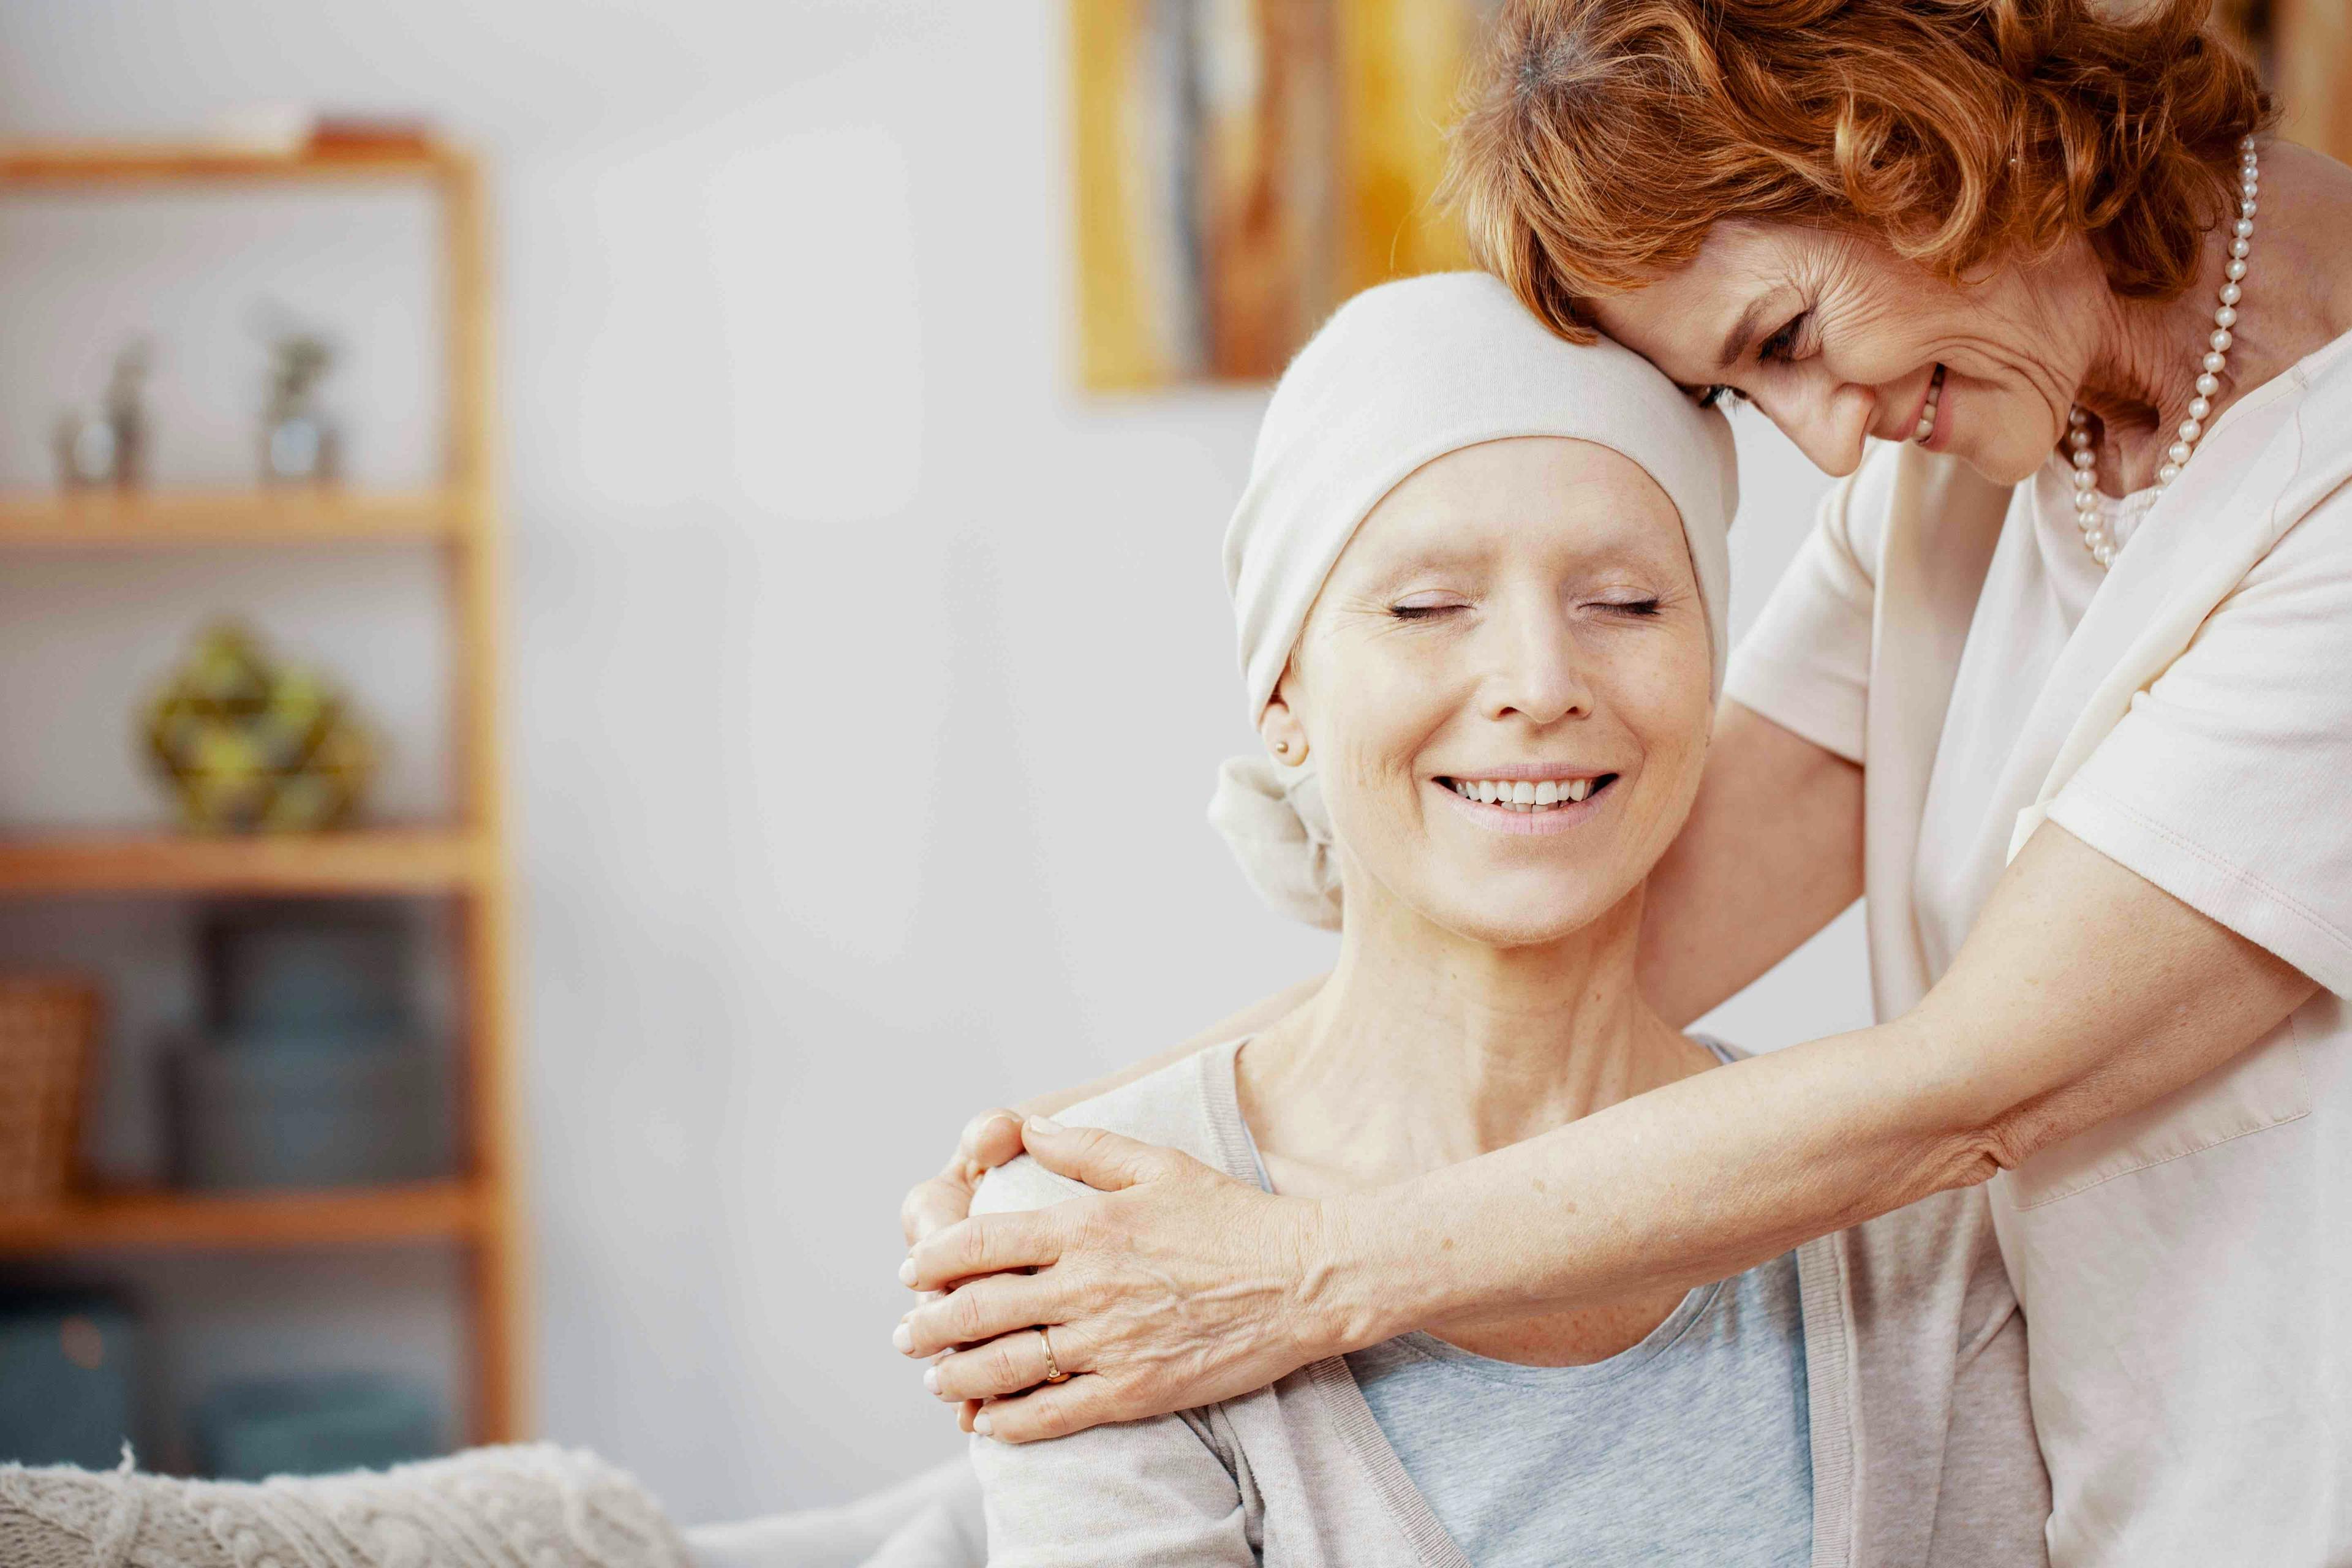 Smiling redhead woman hugging her sick sister who has cancer | © Adobe Stock